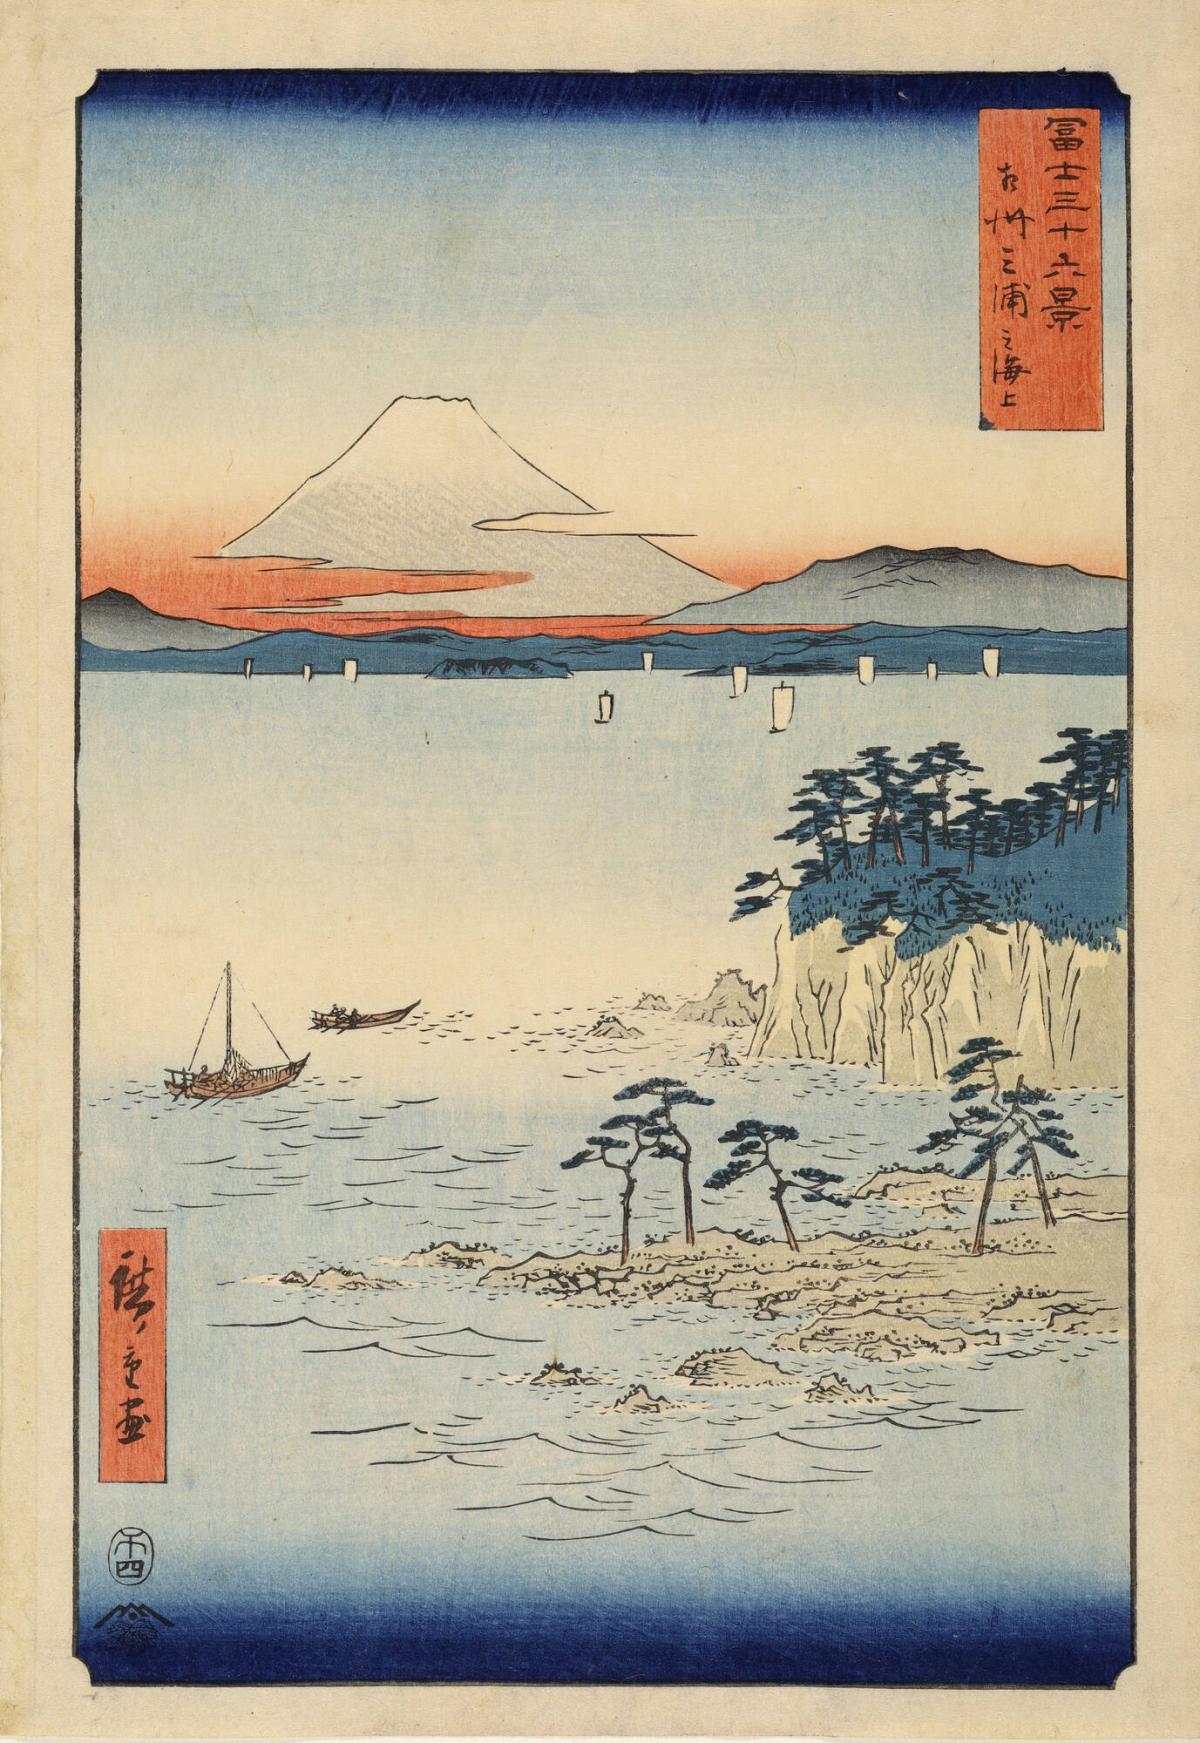 The Sea off the Miura Peninsula in Sagami Province, from the series Thirty-six Views of Mt. Fuji